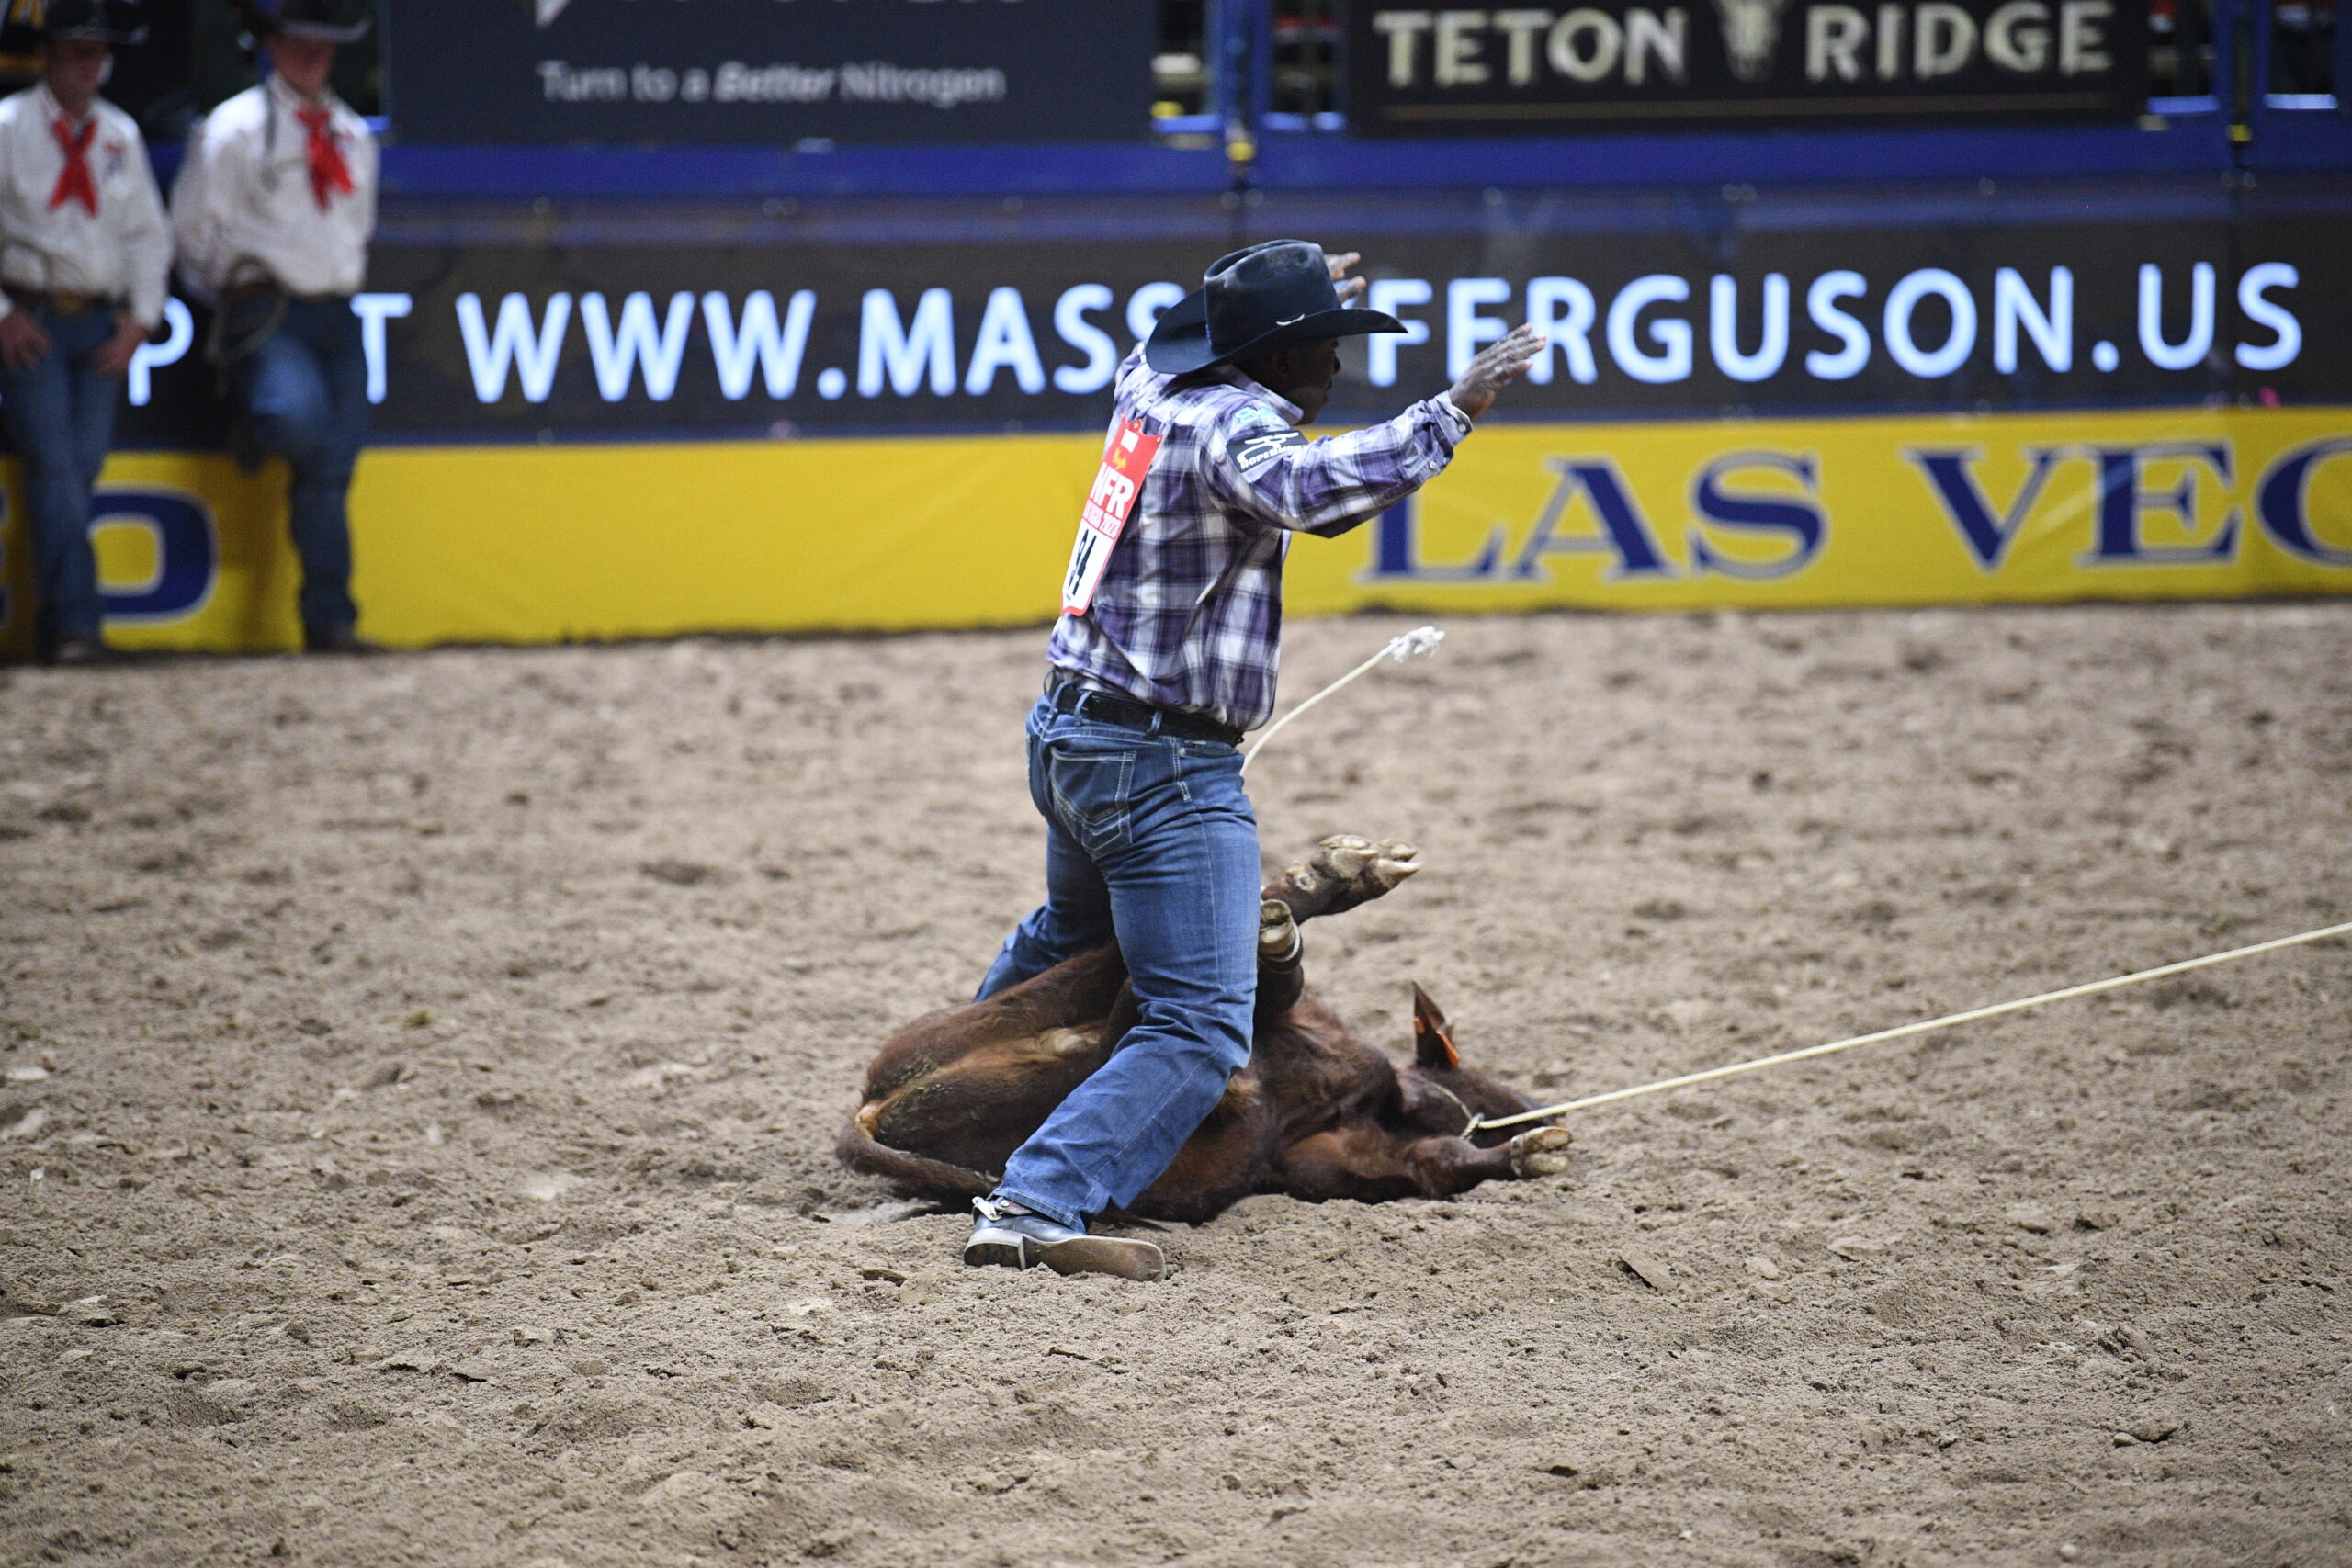 In Round 1, John Douch gets his first-ever go-round win on his third trip to the Wrangler NFR.